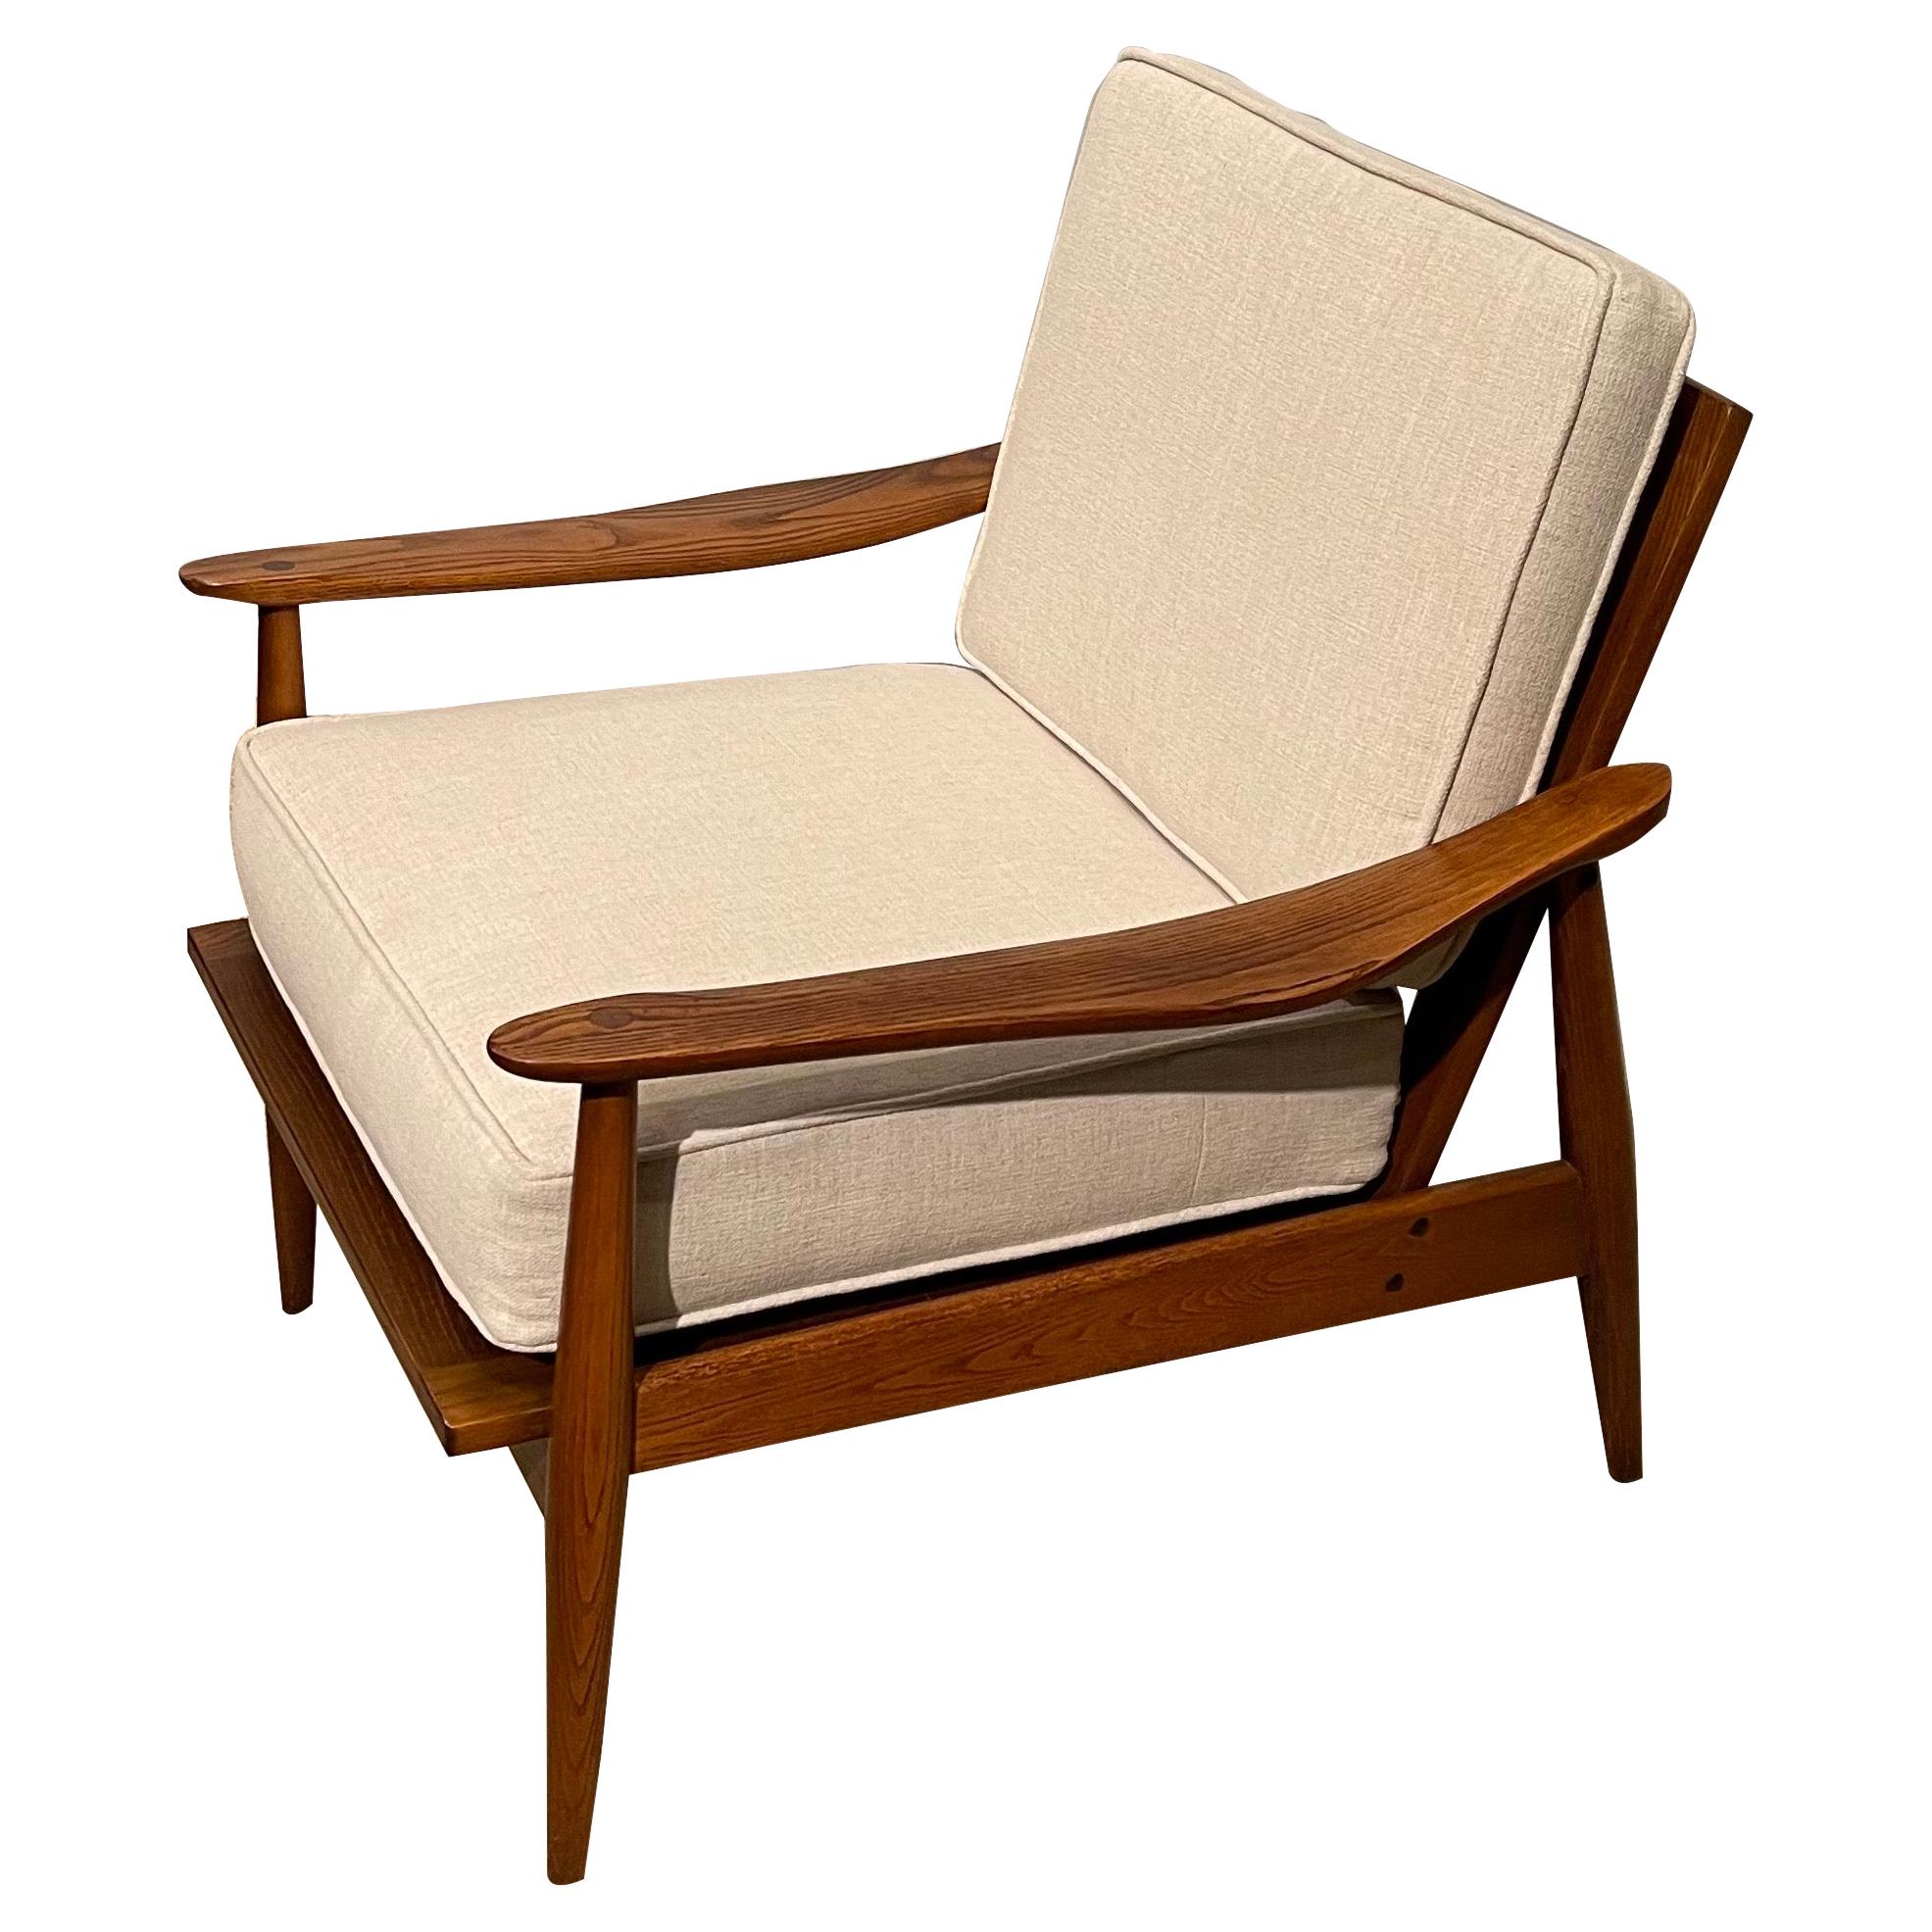 The Moderns Modernity Armchair W New Seat & Back Cushions